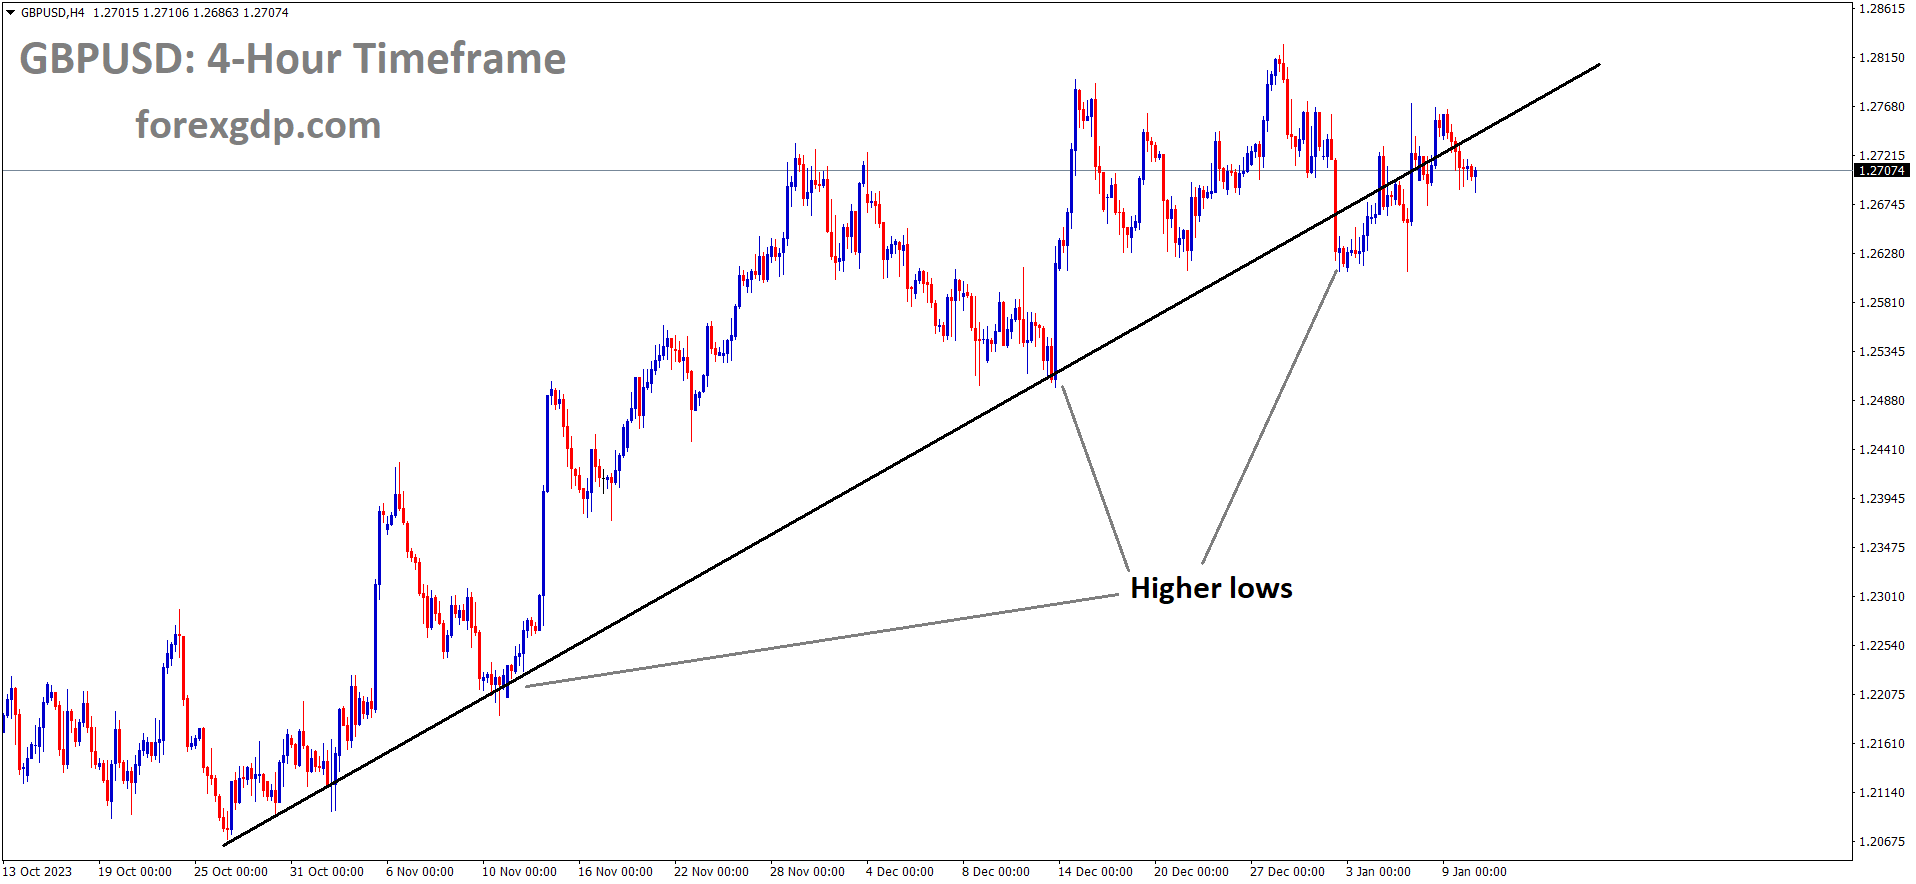 GBPUSD is moving in an Up trend line and the market has reached the higher low area of the trend line